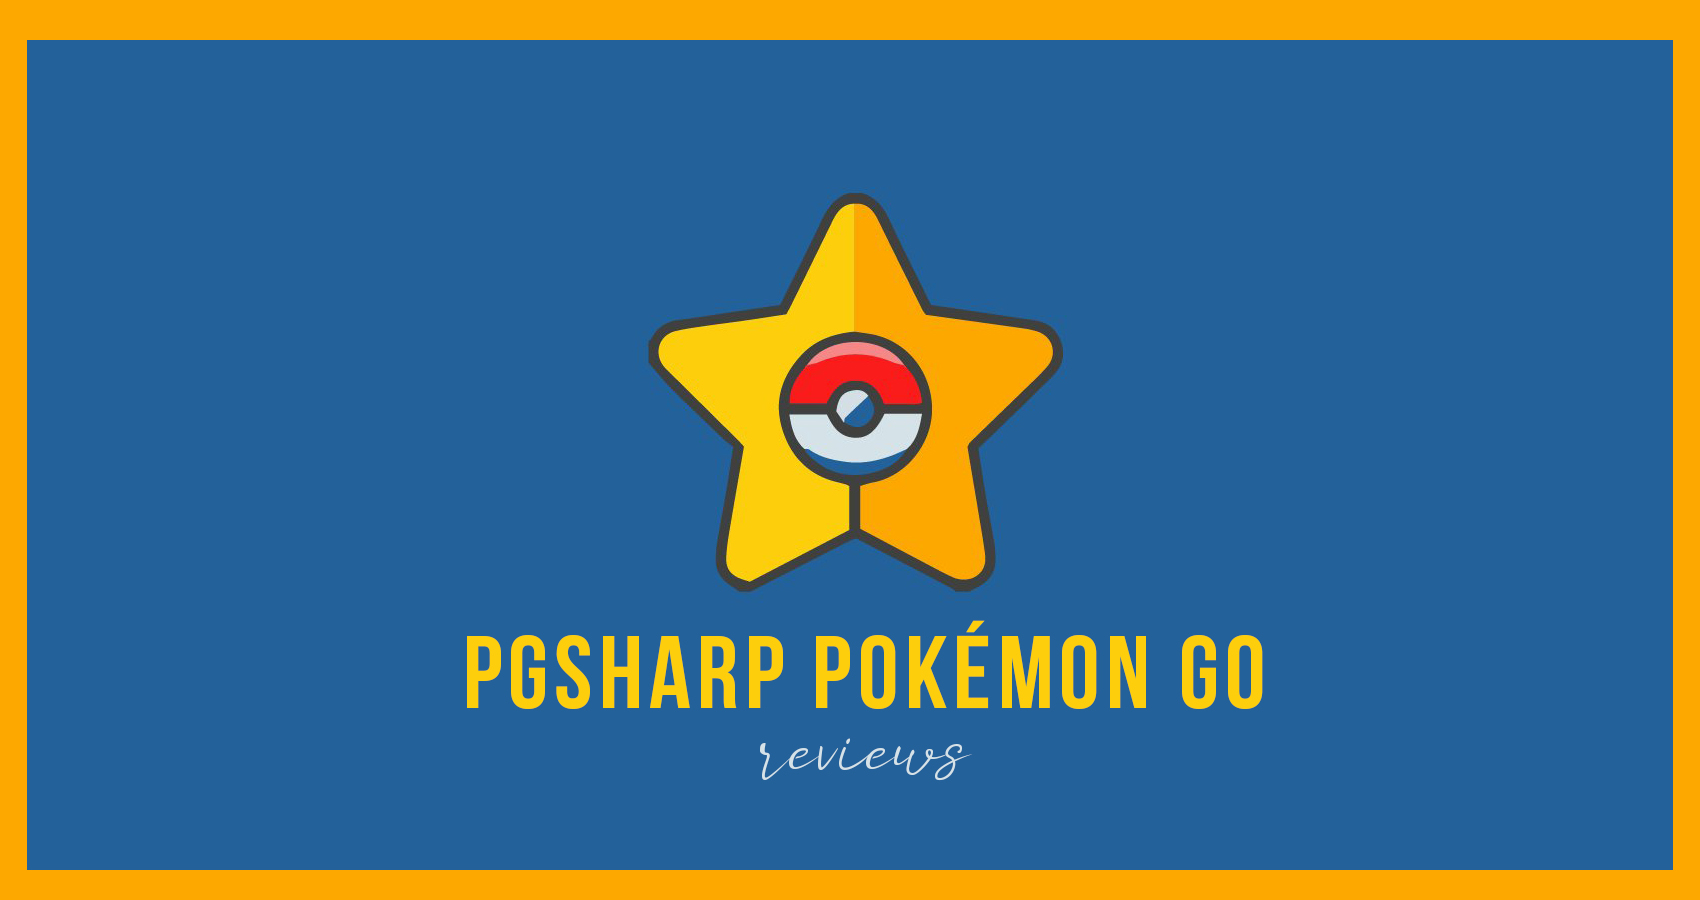 PGSharp Pokémon Go: What it is, where to download it and more